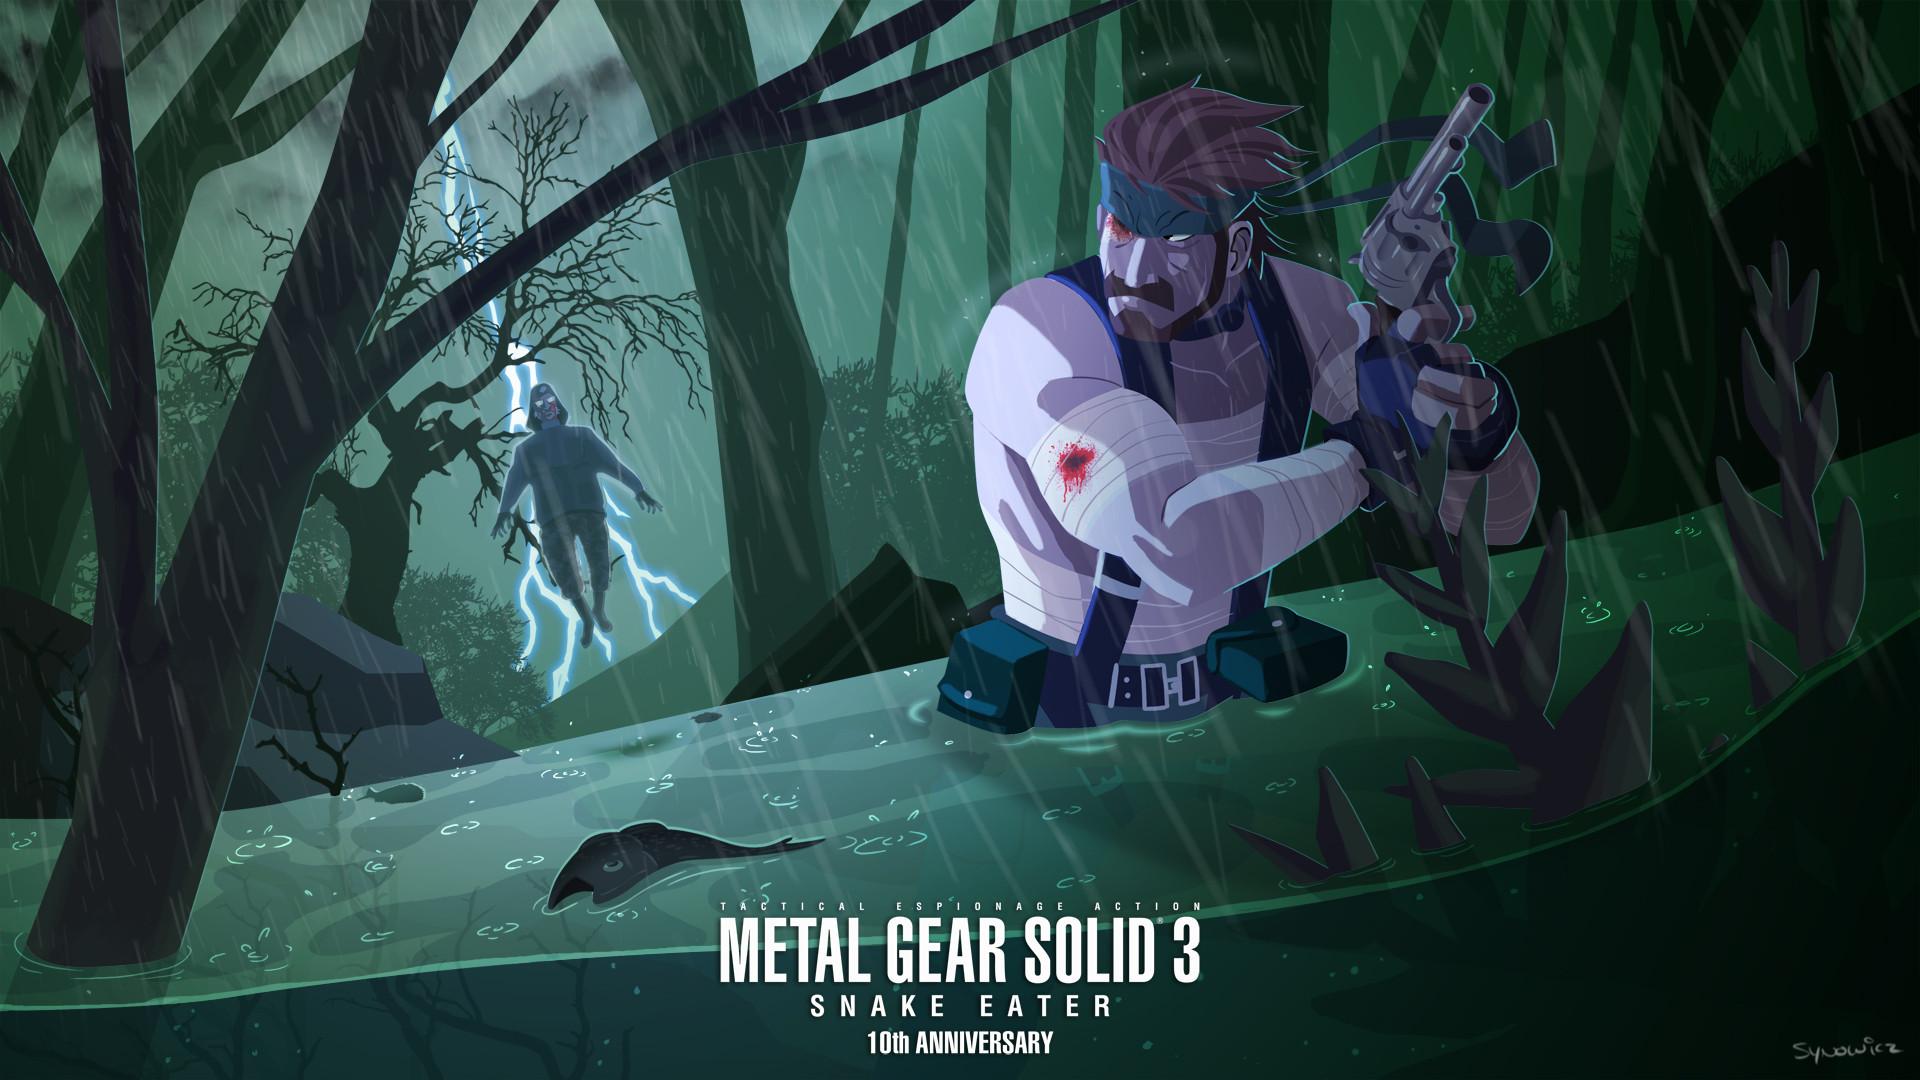 Metal Gear Solid 3 Wallpaper background picture